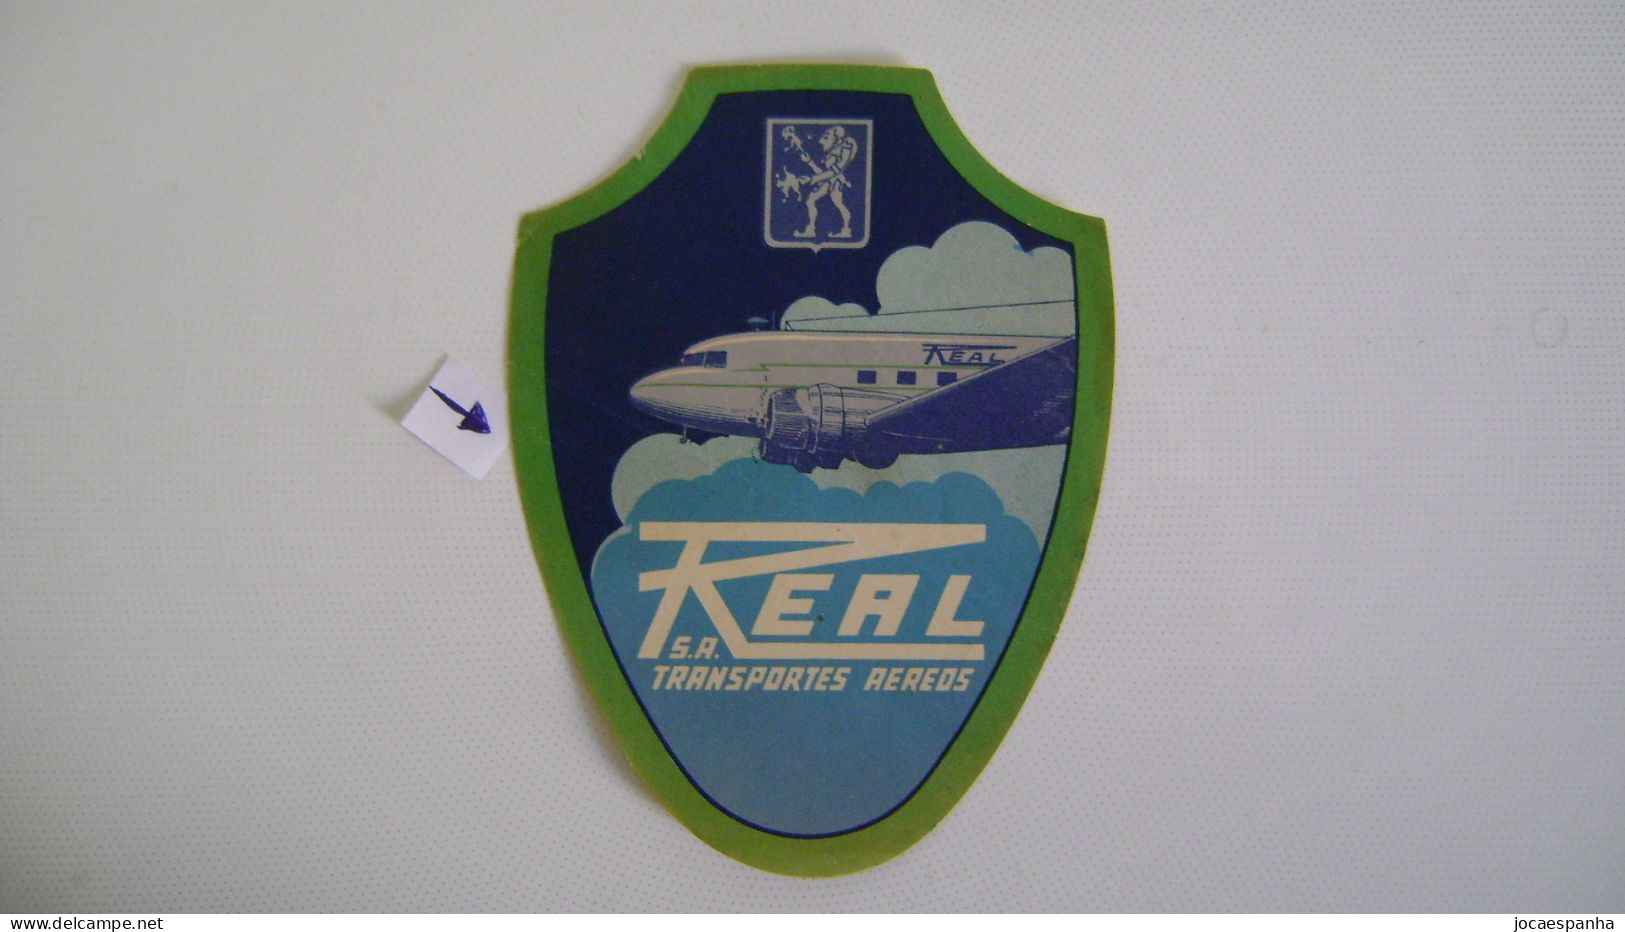 BRAZIL / BRASIL - LABEL OF THE REAL TRANSPORTES AEREOS AIRLINE COMPANY IN THE STATE - Advertisements